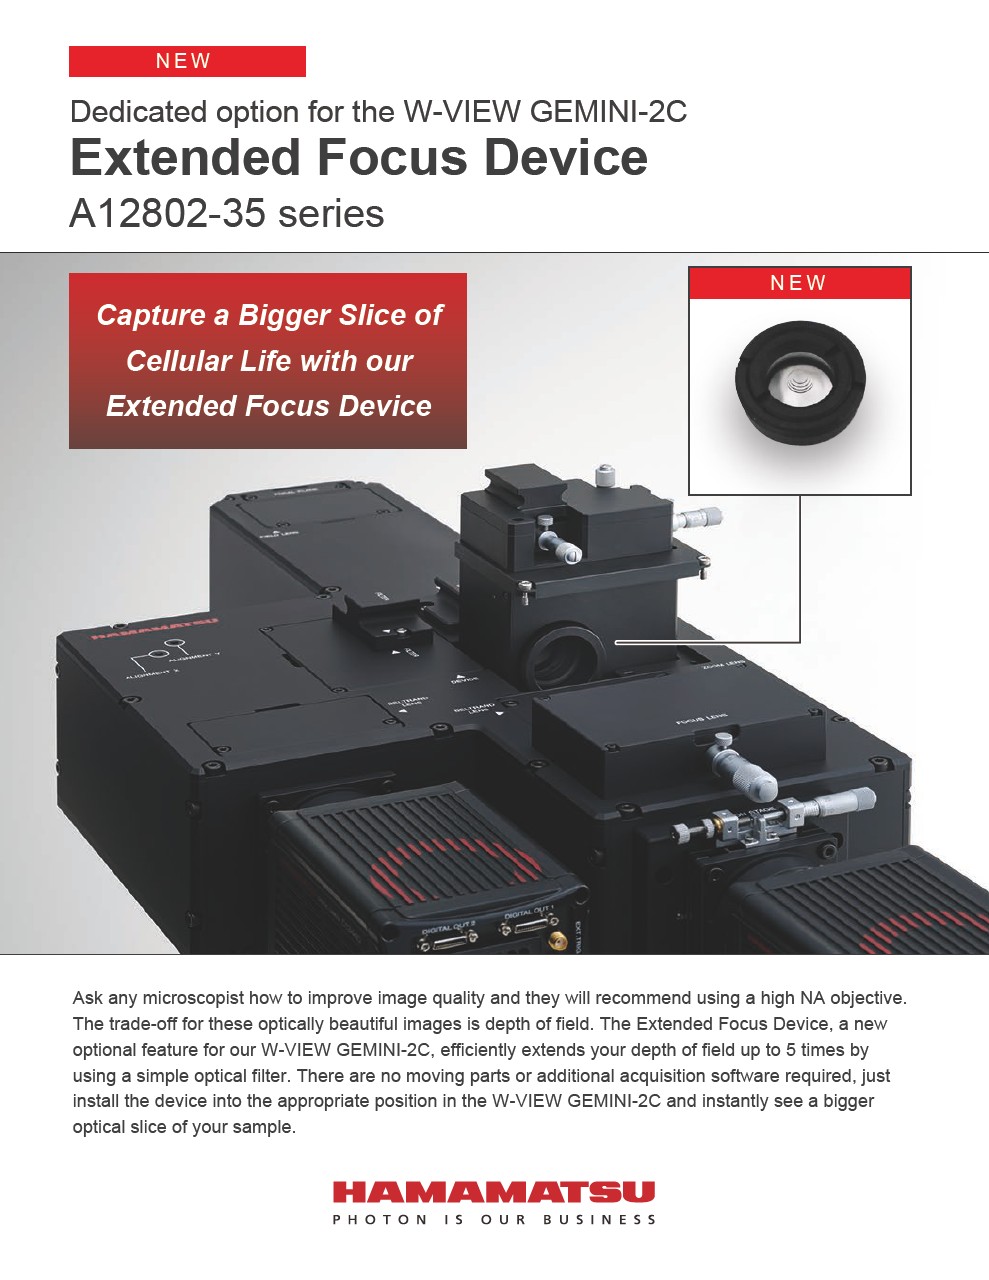 Dedicated option for the W-VIEW GEMINI-2C Extended Focus Device A12802-35 series